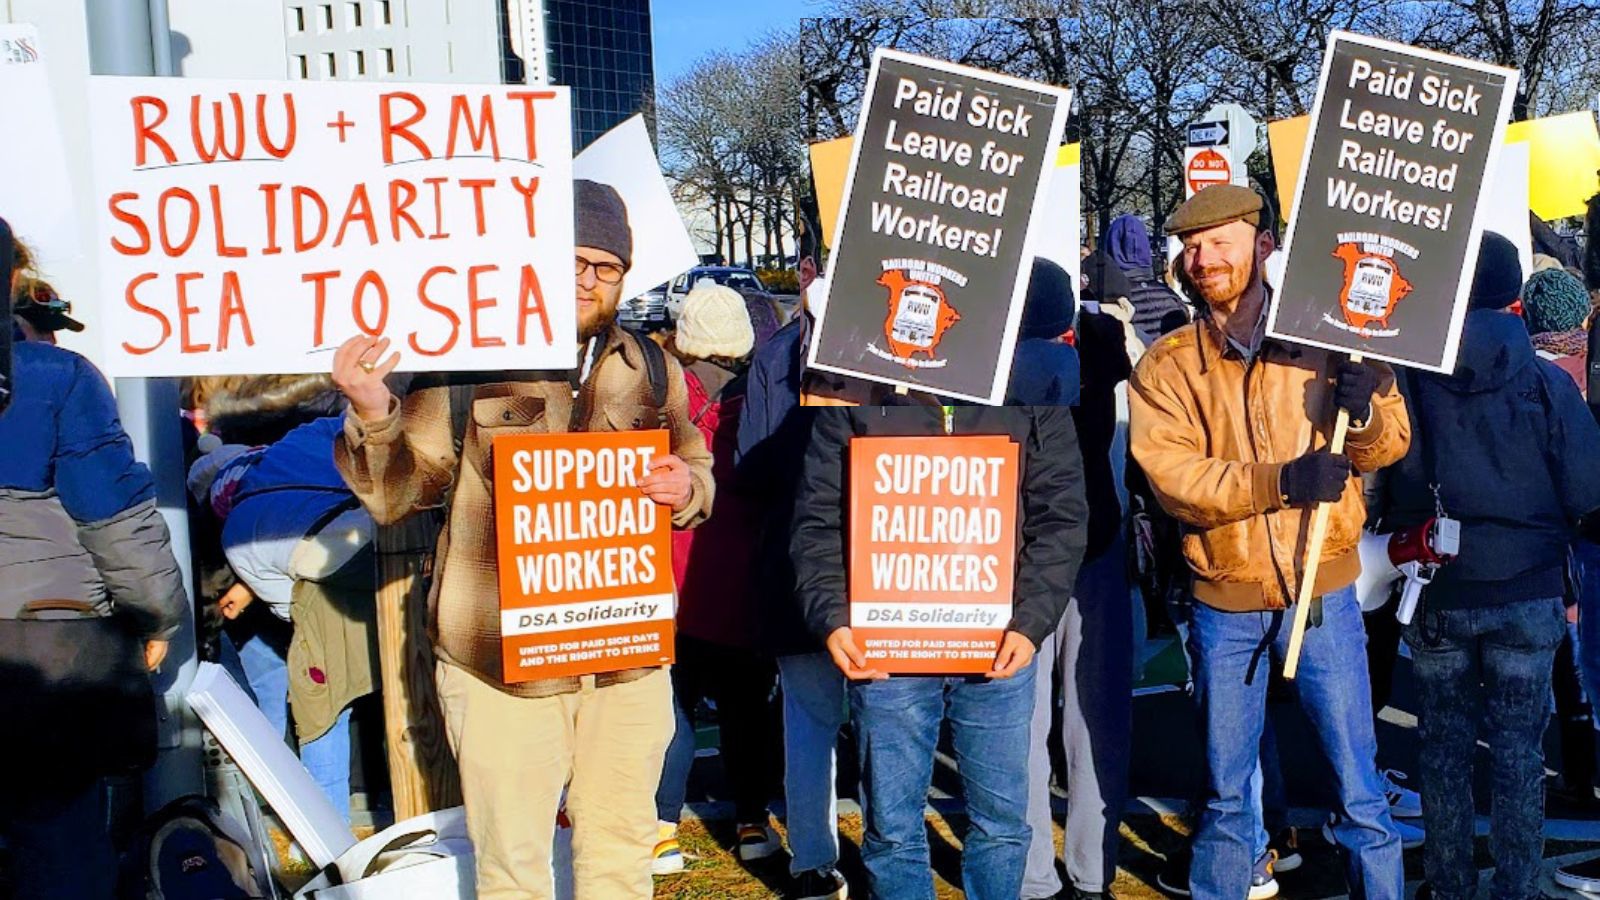 Picture of 3 attendees of a December picket on Biden after a tentative agreement was imposed on rail workers. Attendees' sign say "RWU + RMT Solidarity from Rail to Sea" "Support for Railroad workers, united for paid sick days and the right to strike", and "Paid sick leave for railroad workers"